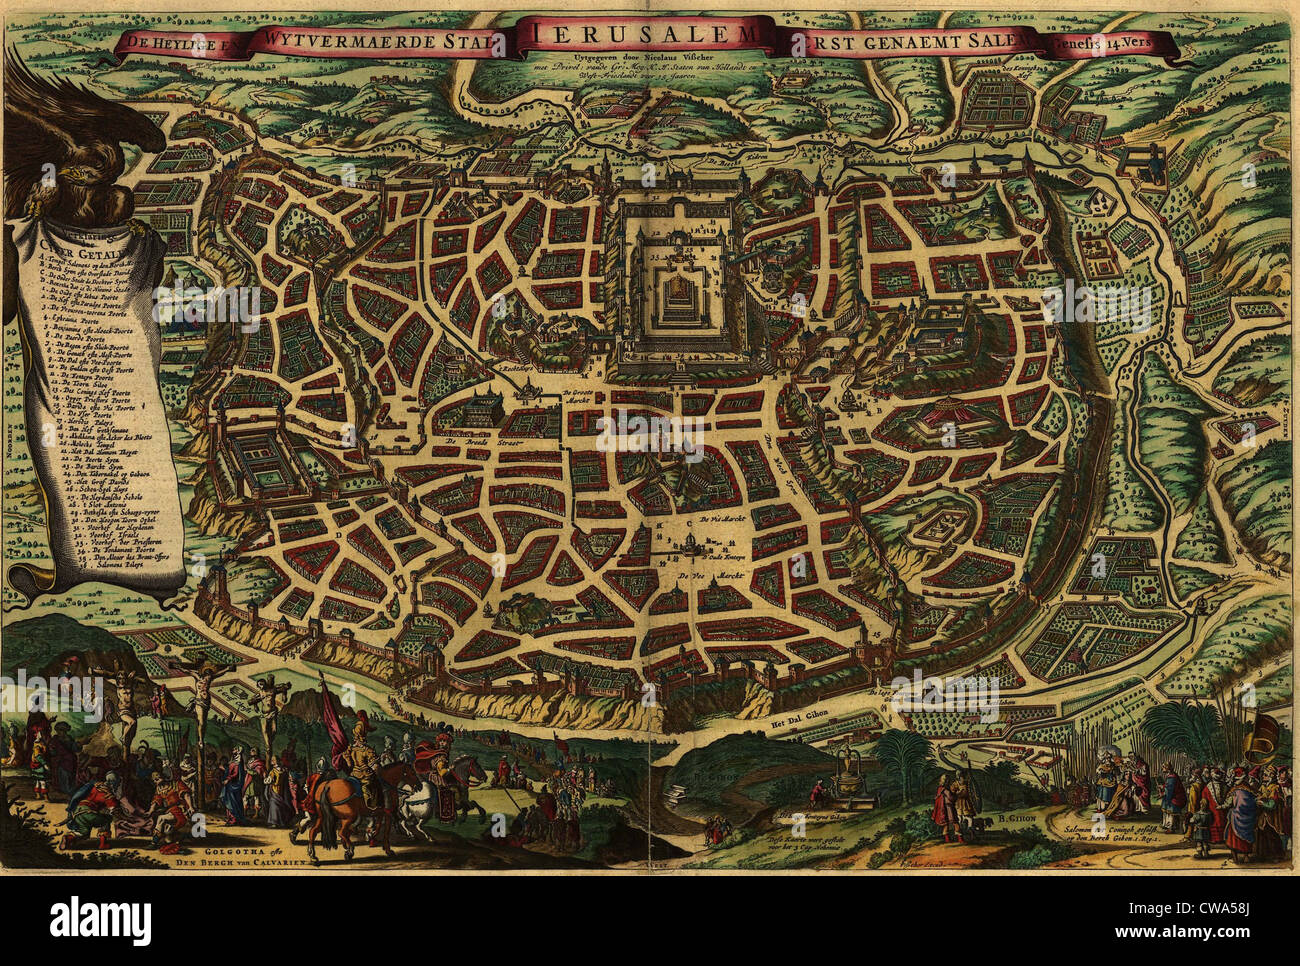 Imagined map from 1650, depicting Jerusalem as it existed in the Roman era. Lower section shows Christ's crucifixion and the Stock Photo